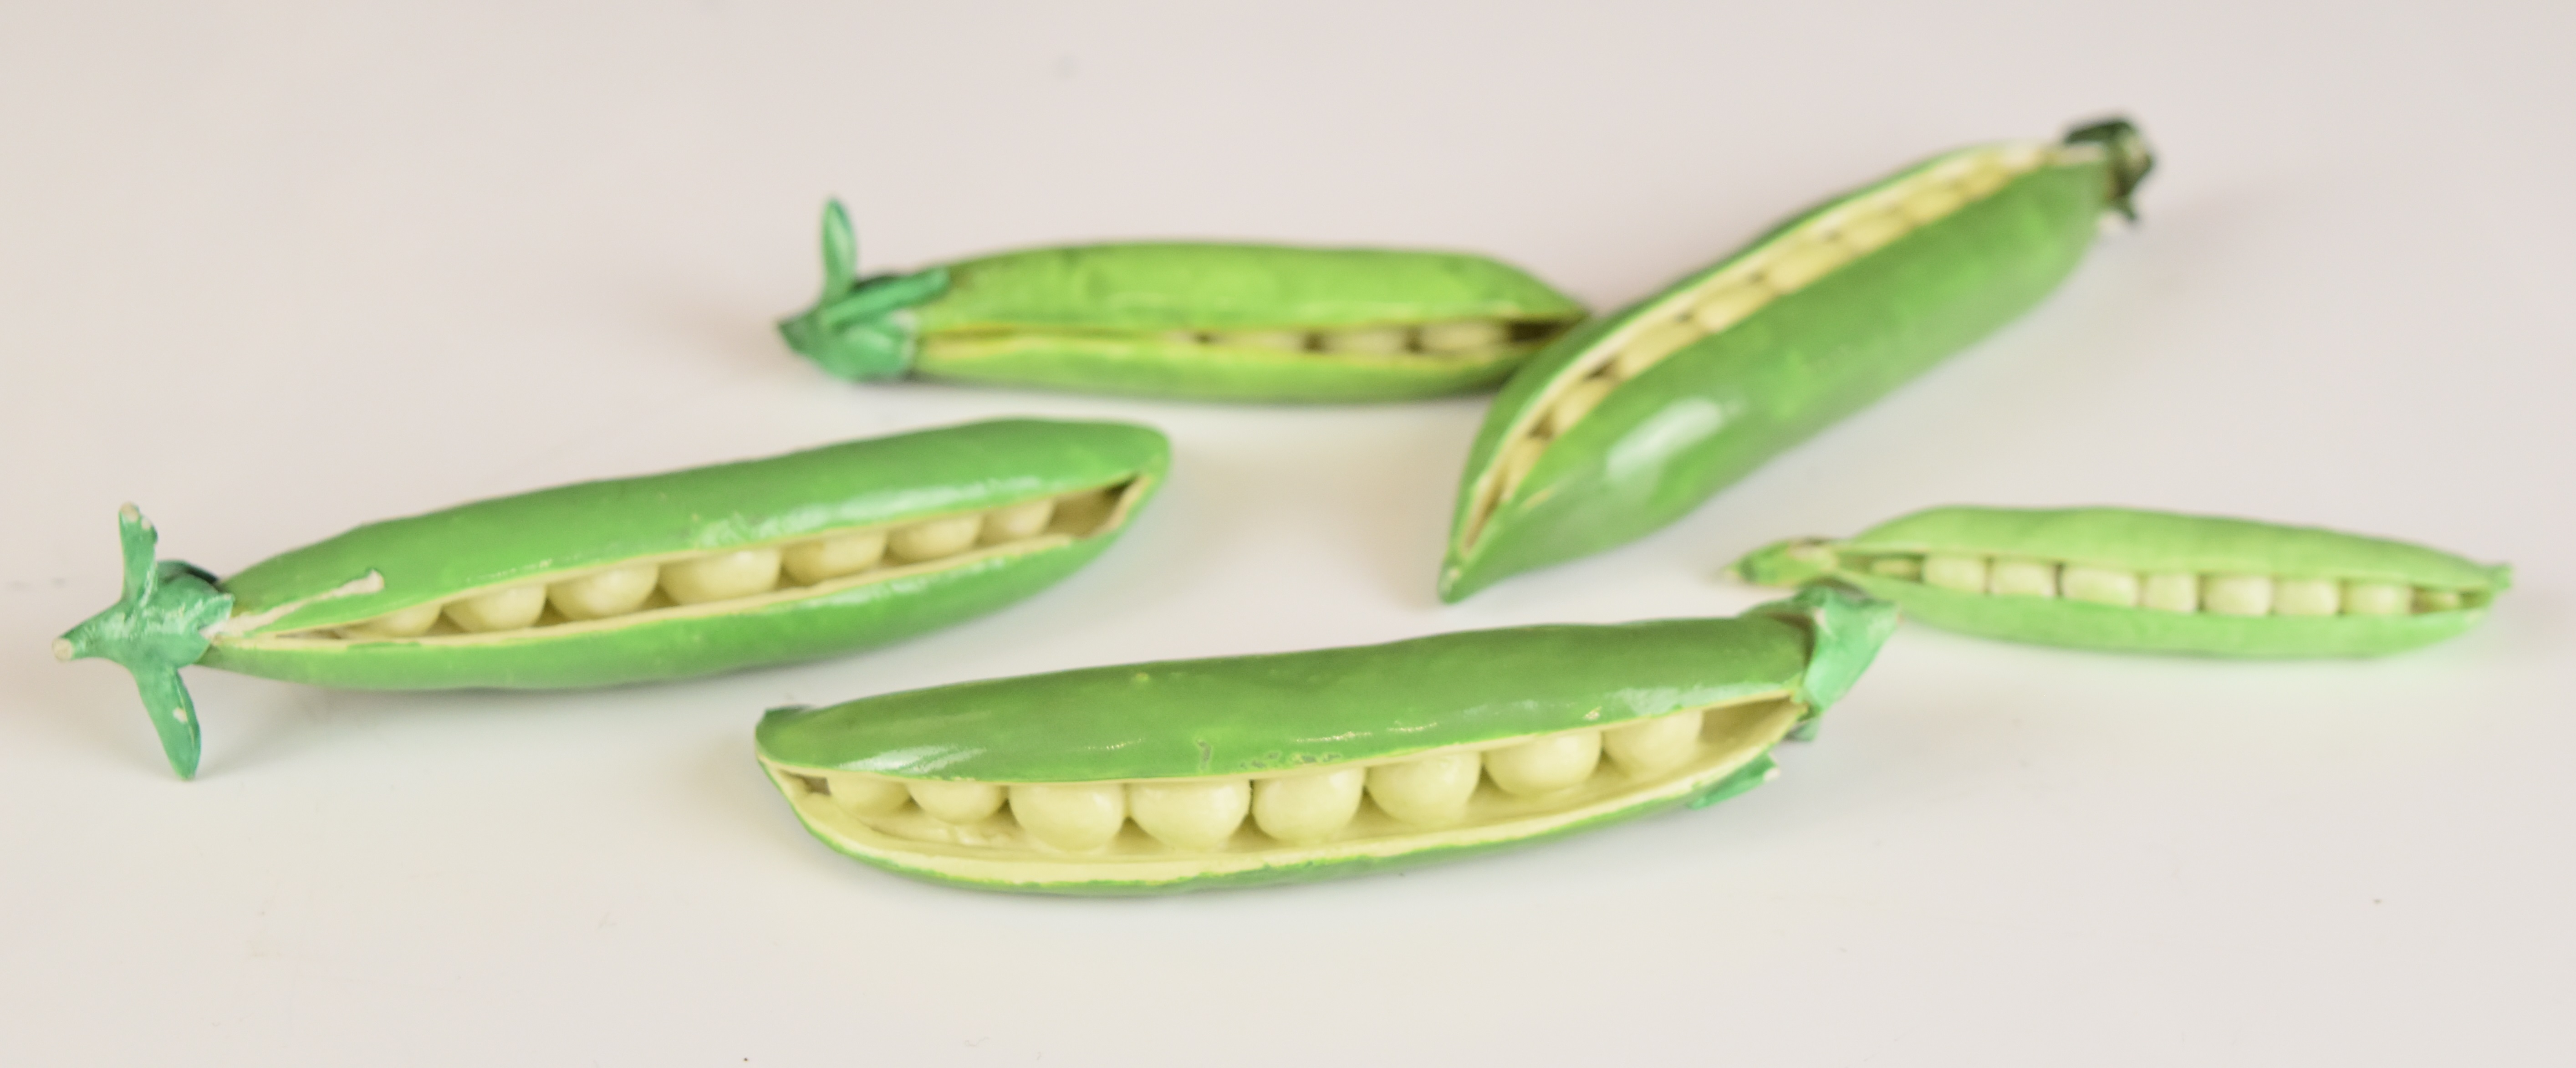 Collection of 19thC Minton / Coalport novelty porcelain pea pods with split pods showing ripe - Image 5 of 8